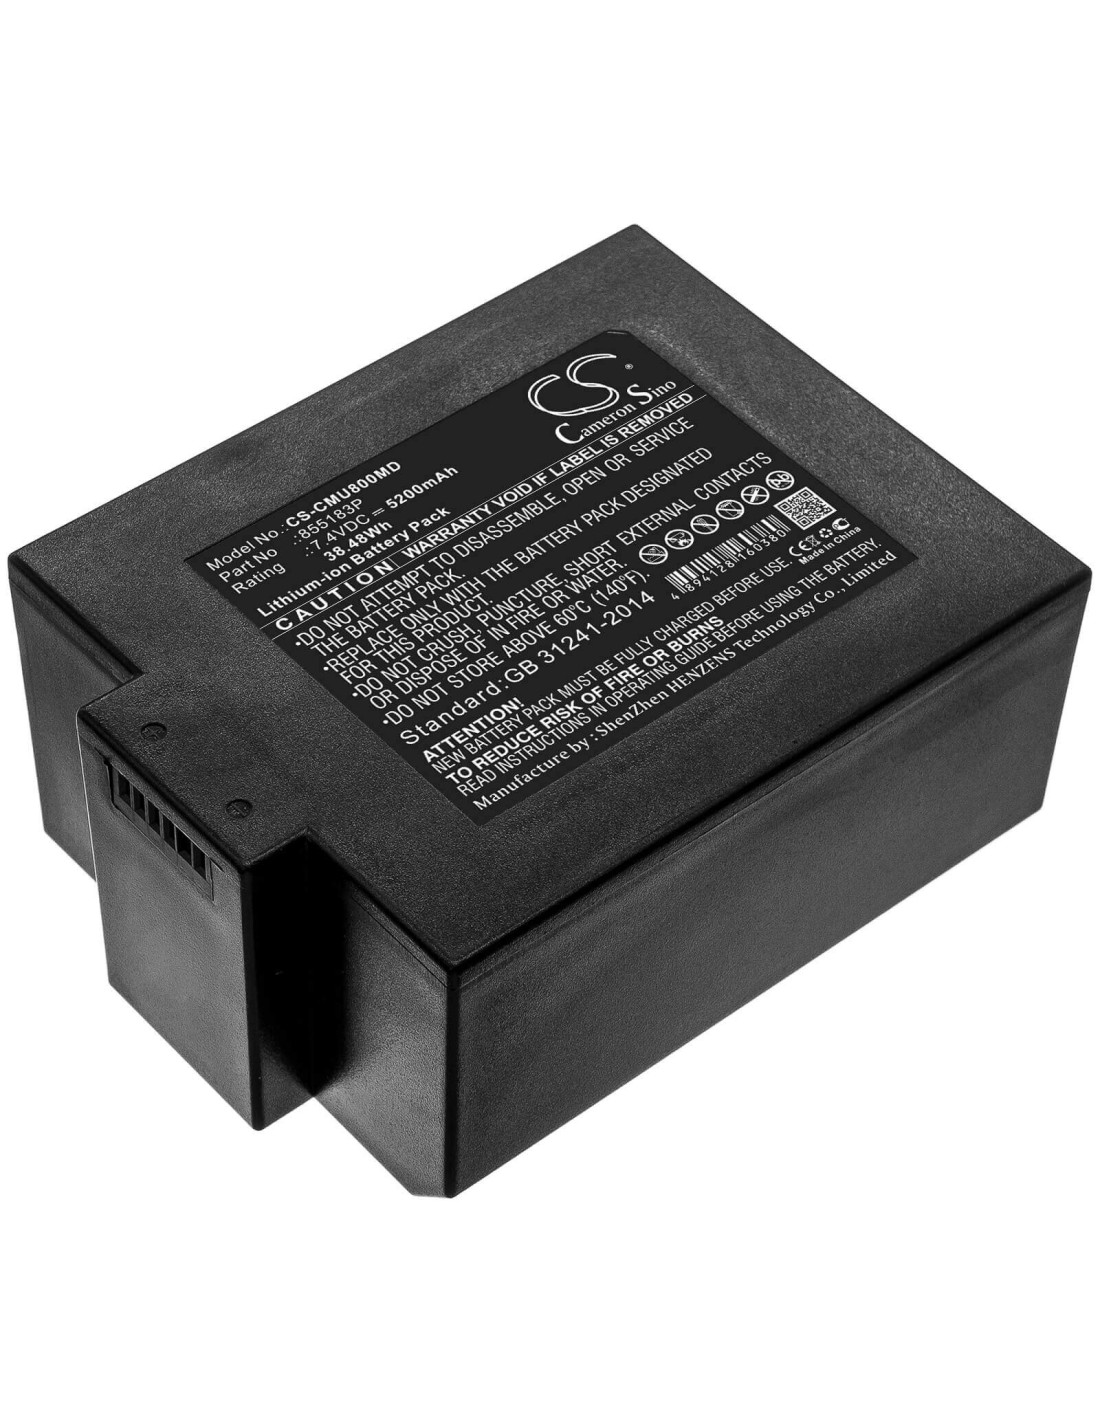 Battery for Contec, Cms8000 Icu Patient Monitor 7.4V, 5200mAh - 38.48Wh